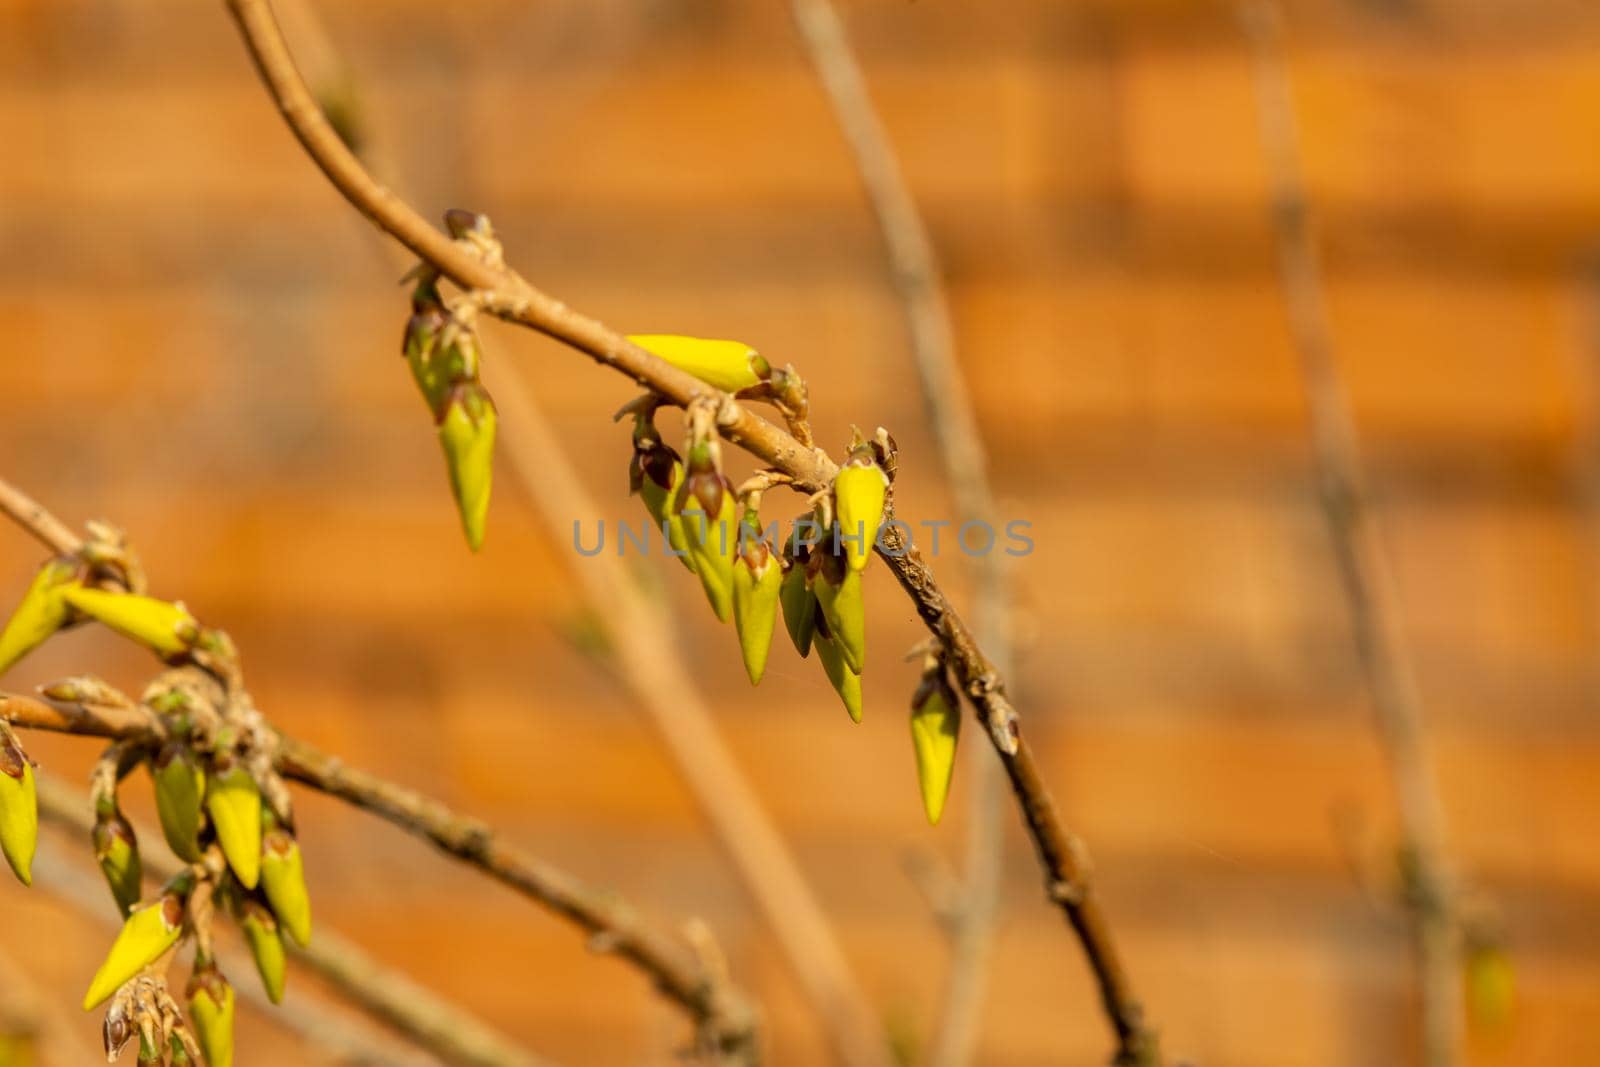 Buds and flowers of yellow forsythia against the background of bare branches of a bush on a blurred background horizontal photo